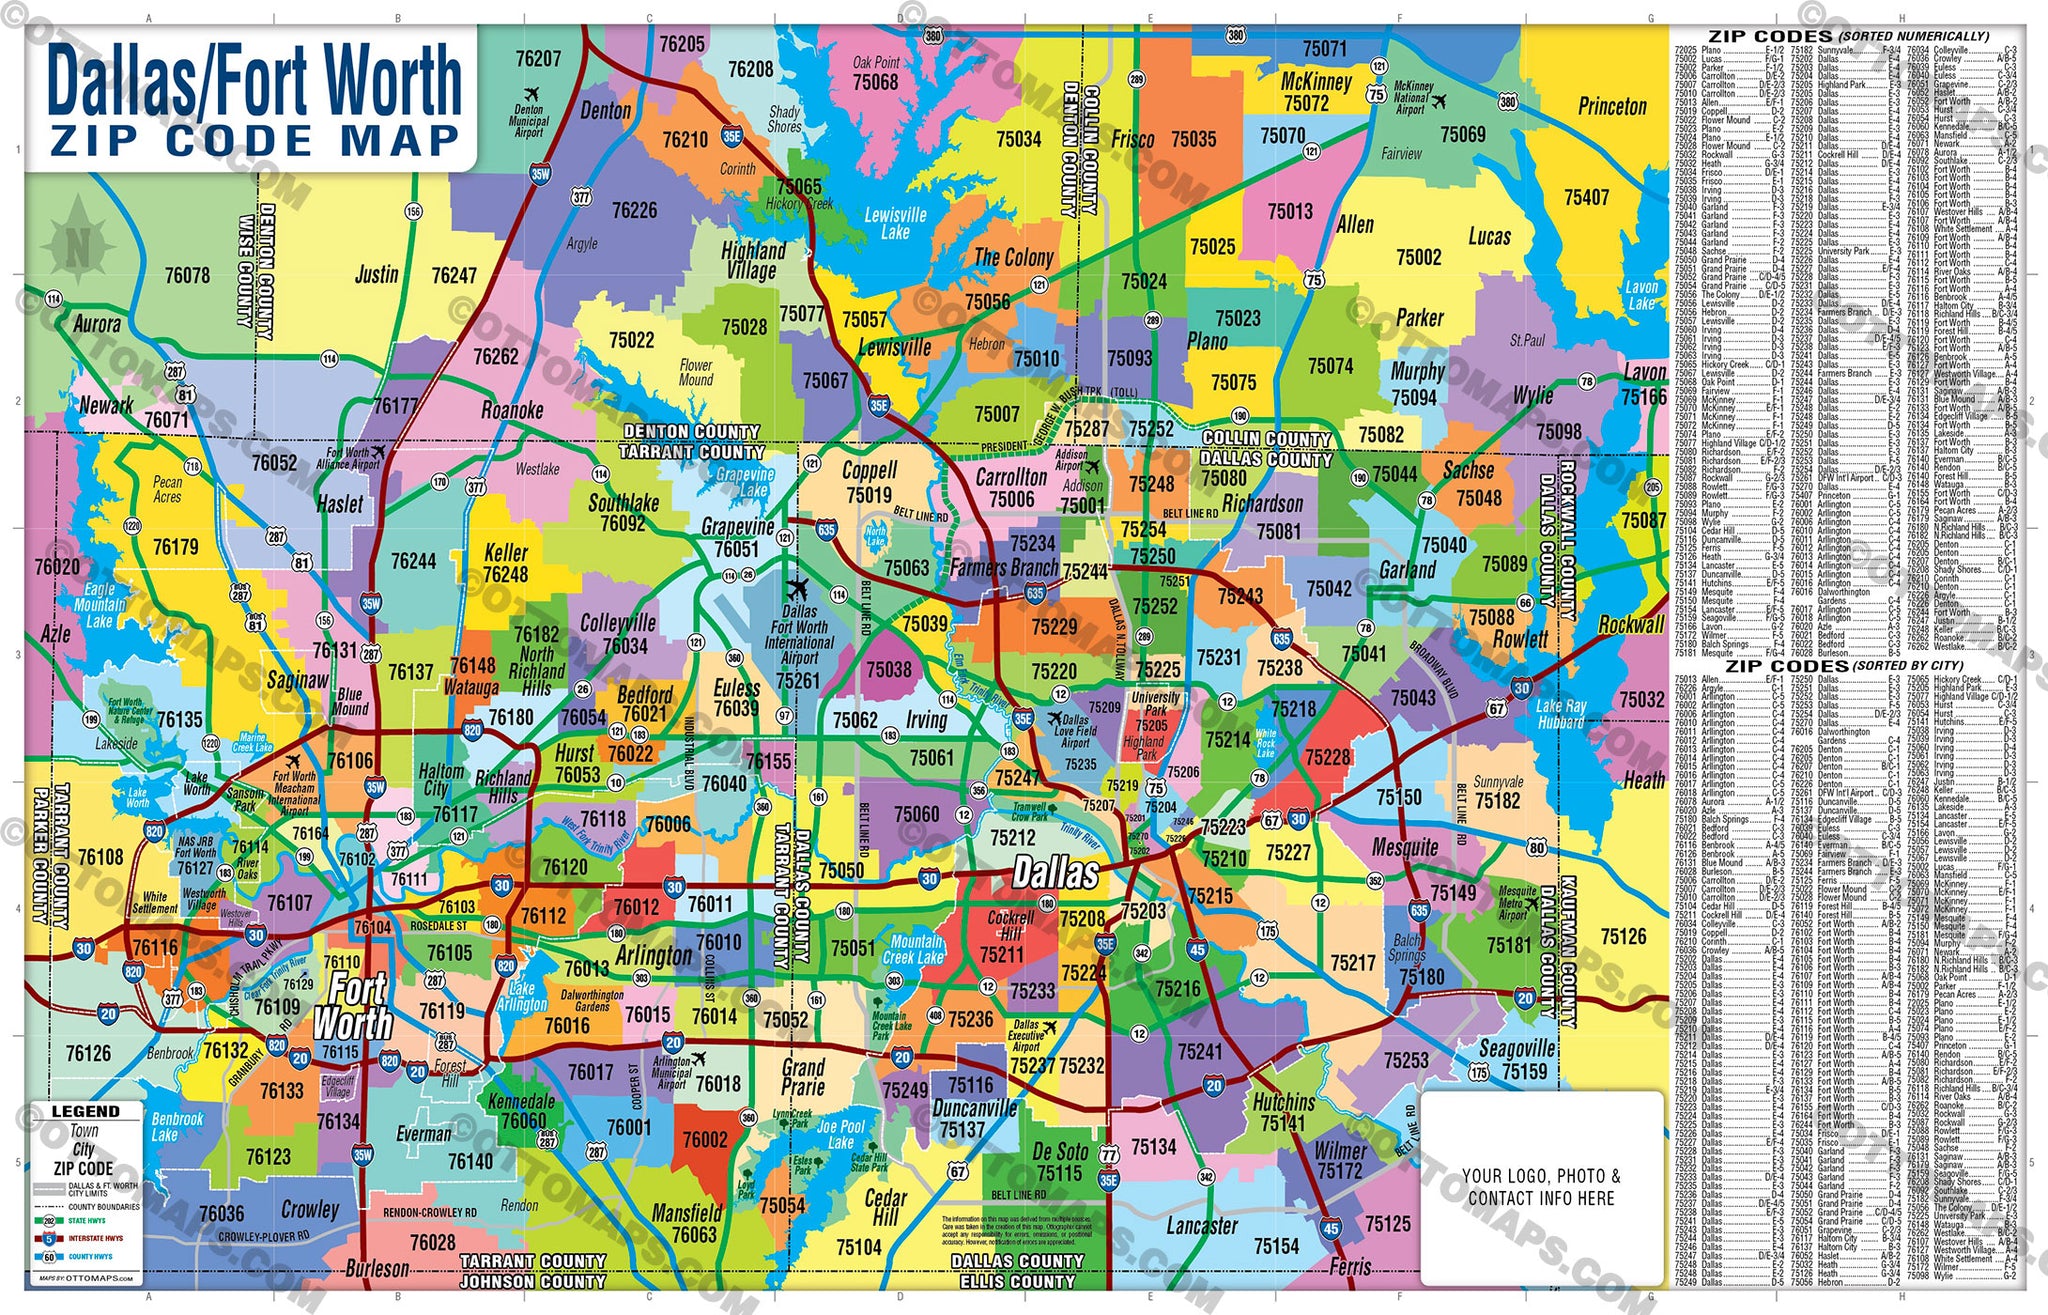 Dallas Fort Worth Zip Code Map Zip Codes Colorized Otto Maps 0198